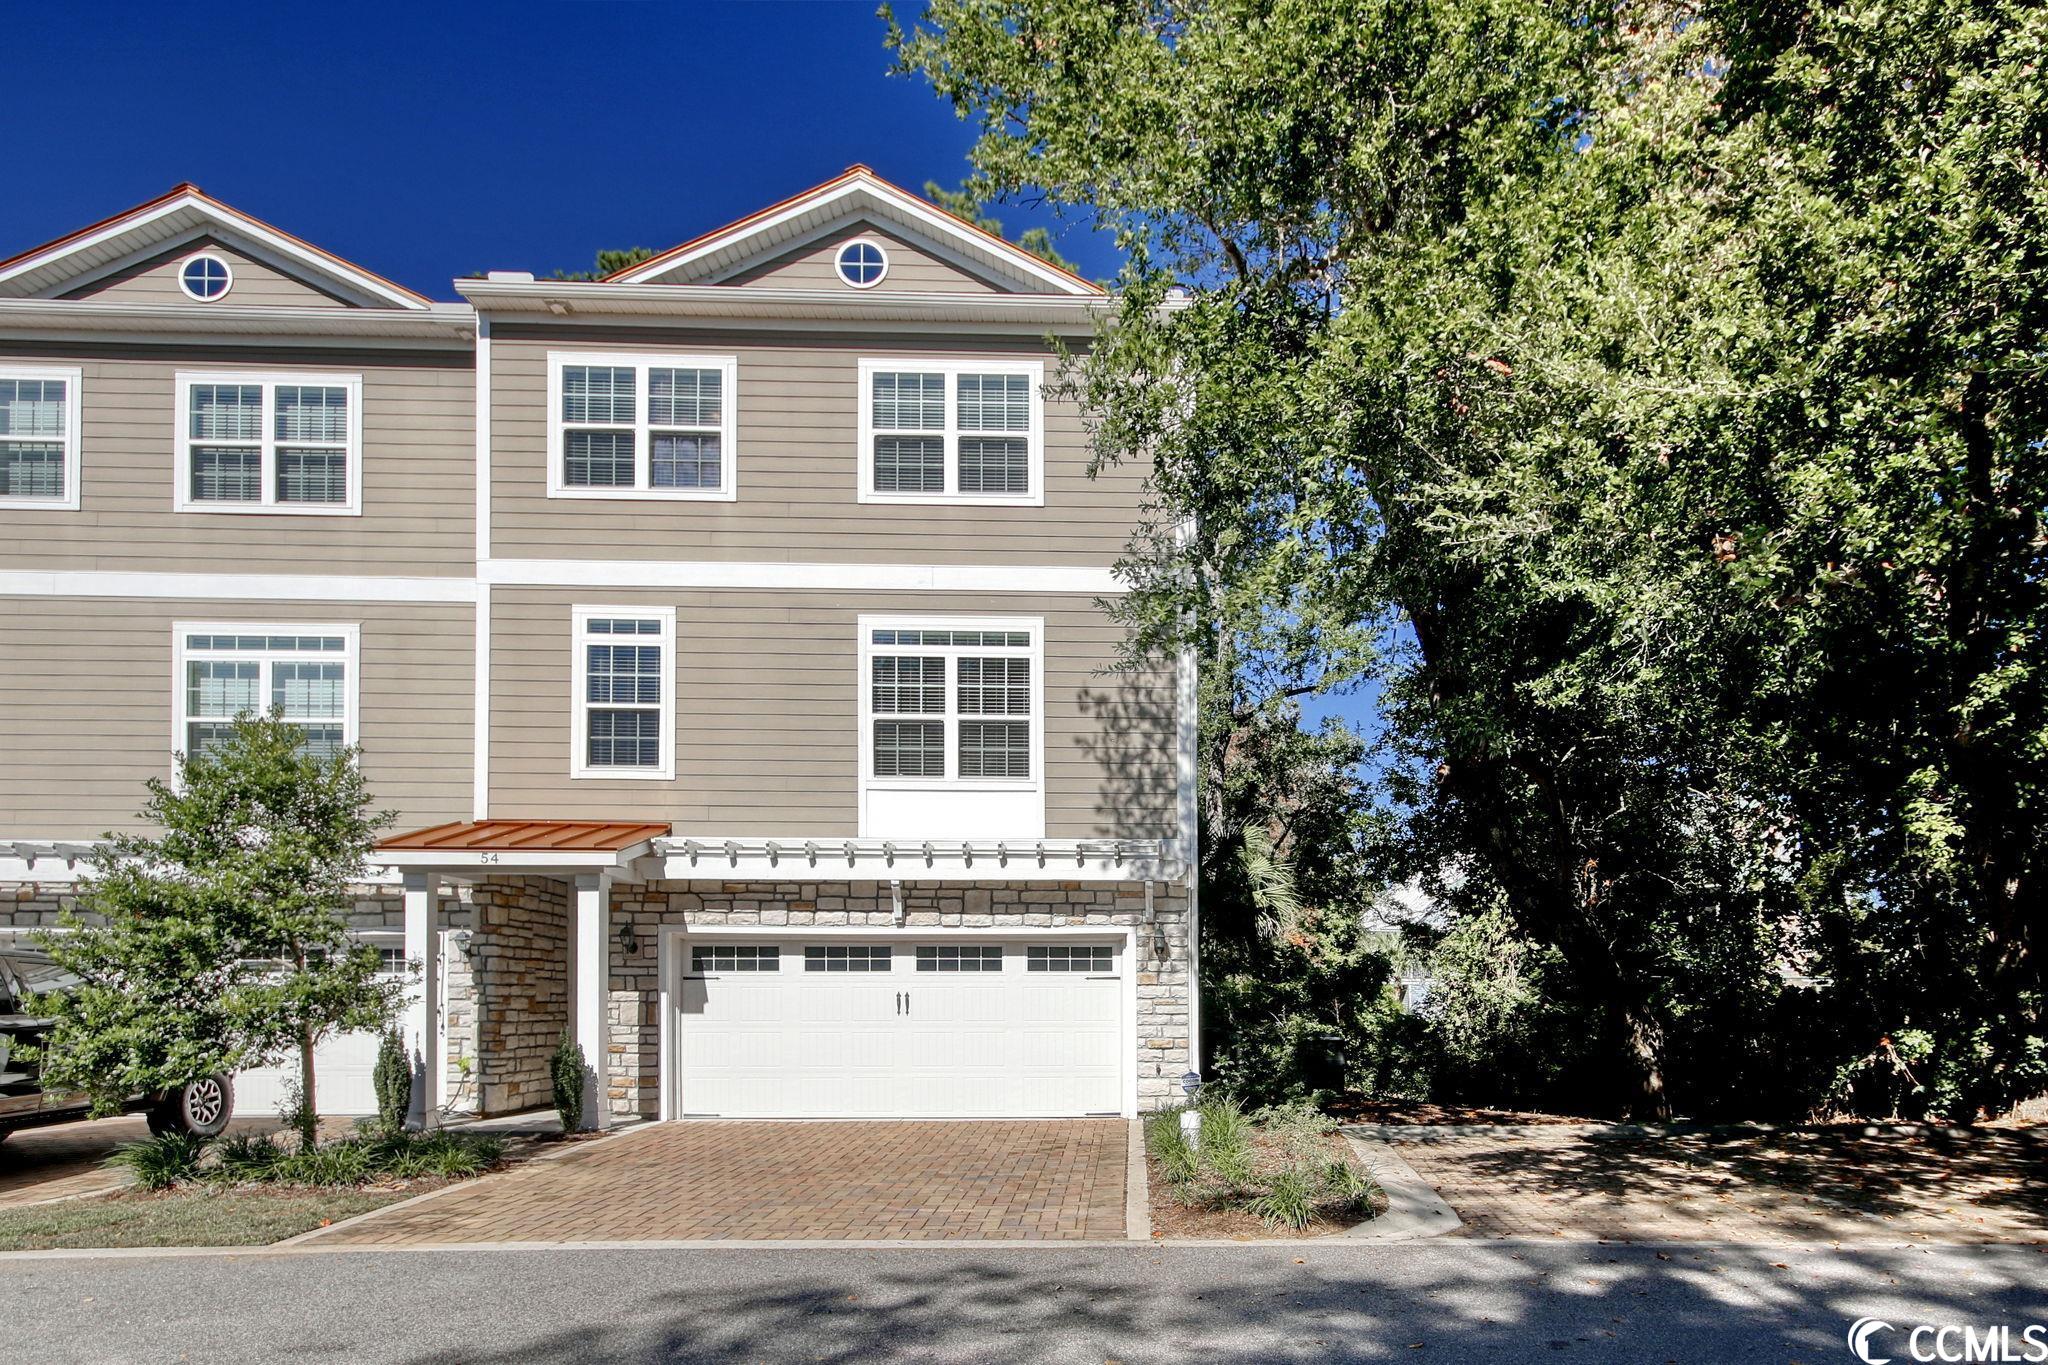 View Murrells Inlet, SC 29576 townhome